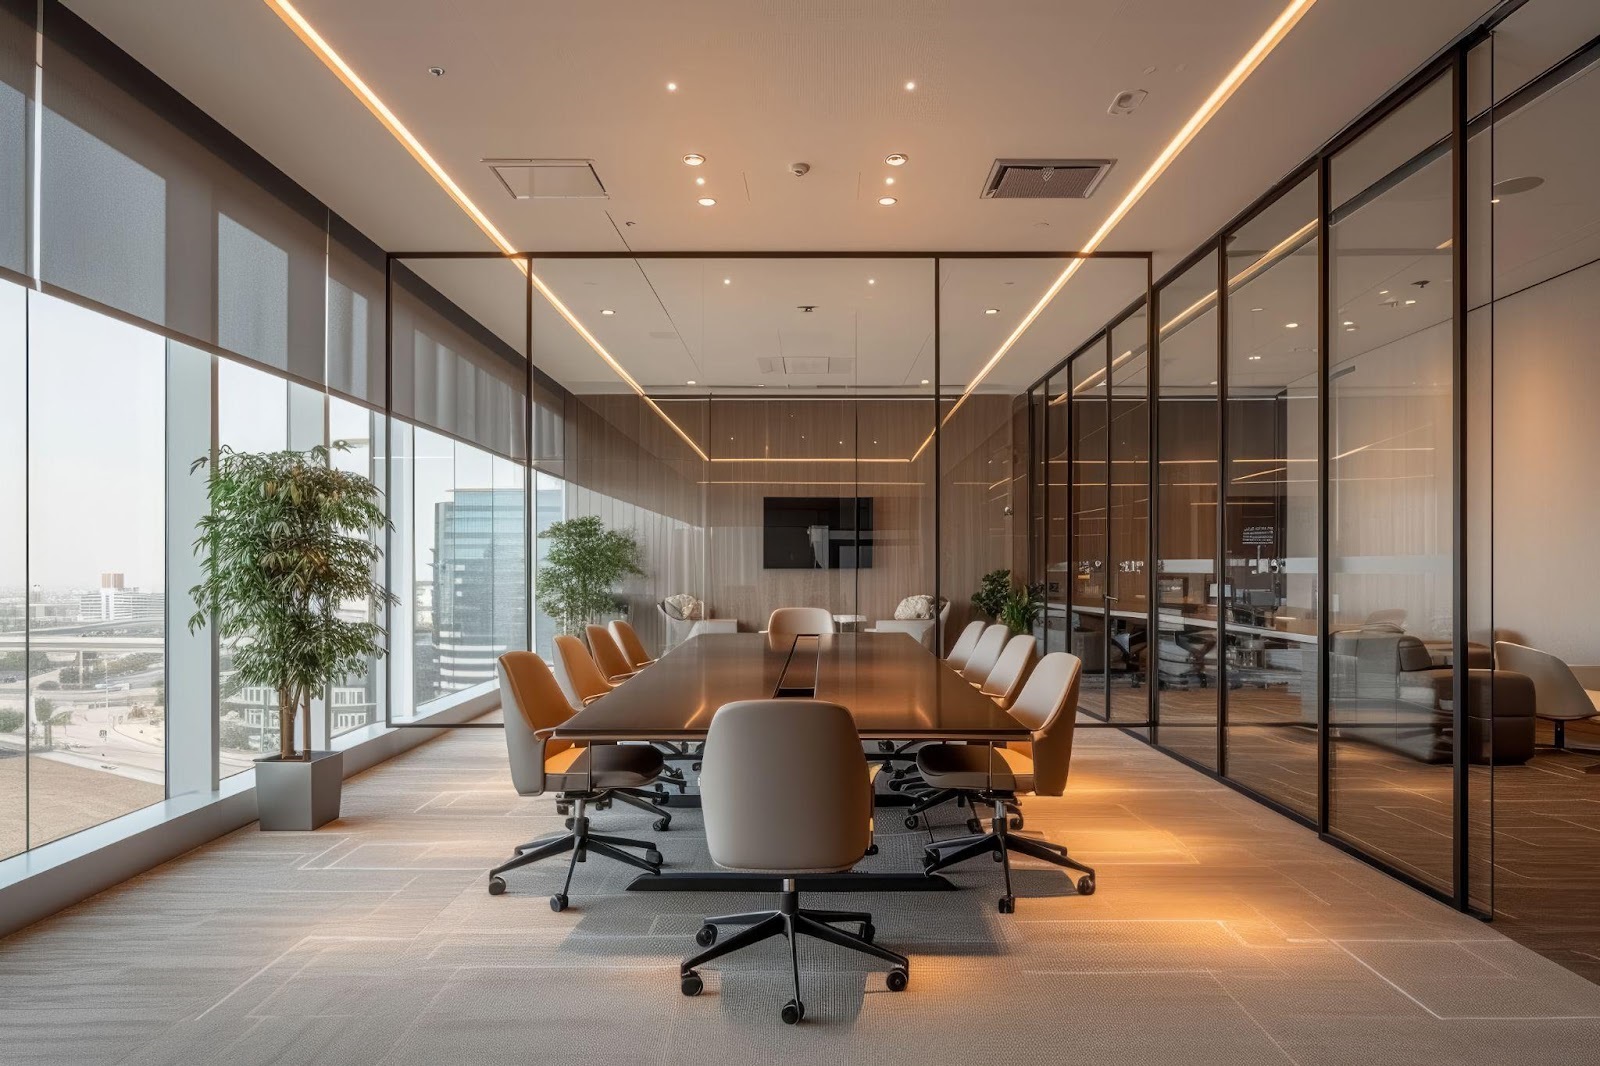 A modern conference room with glass walls and chairs